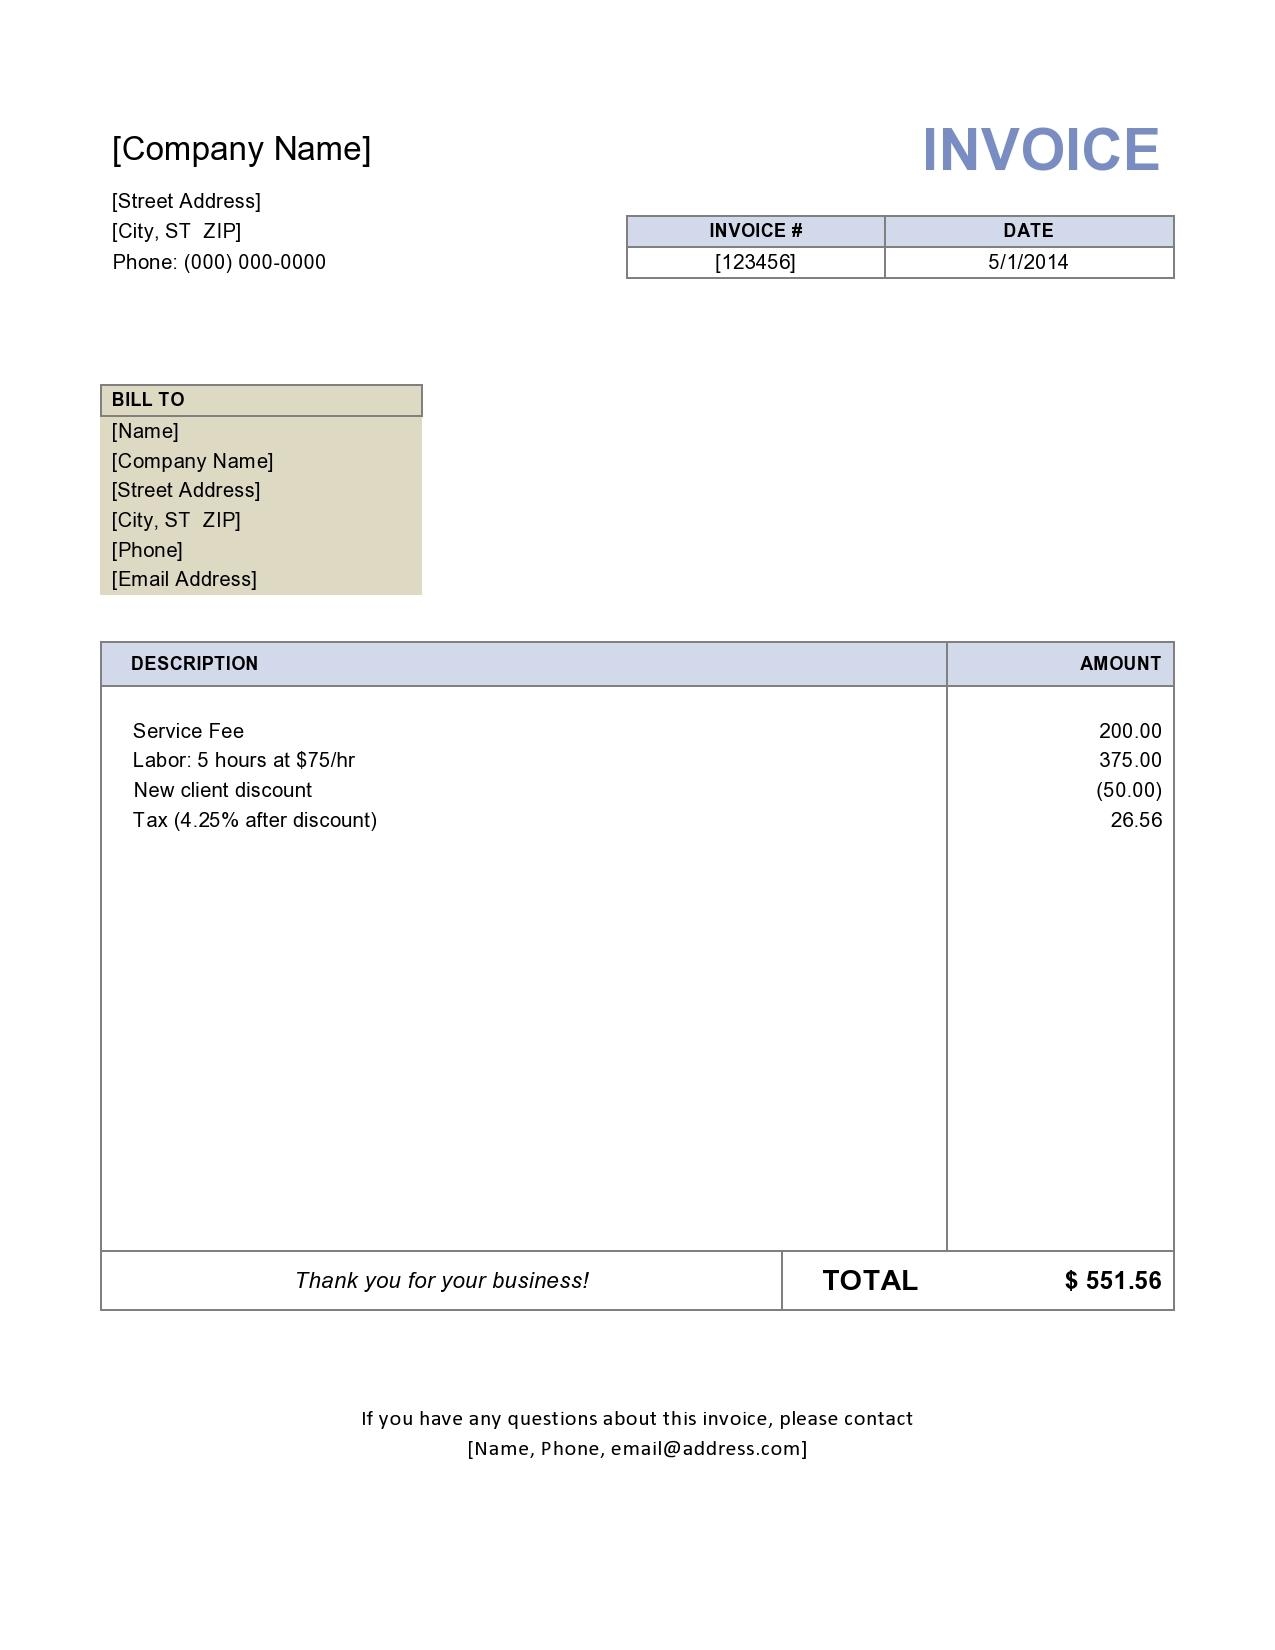 consulting invoice template word invoice in word commercial invoice freewordtemplates word 1275 X 1650